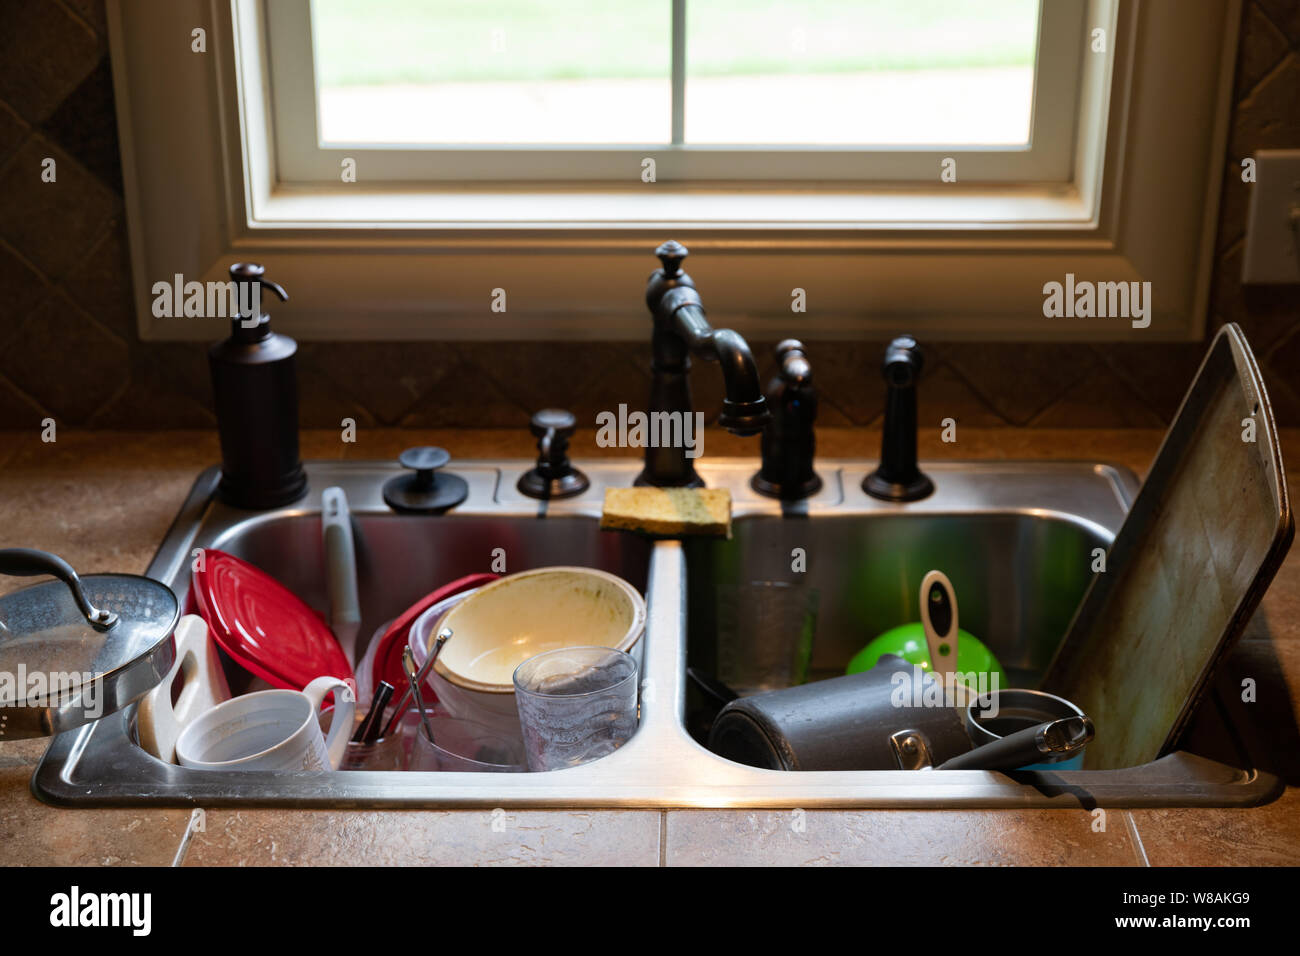 Stack of dirty dishes piled into the kitchen sink Stock Photo